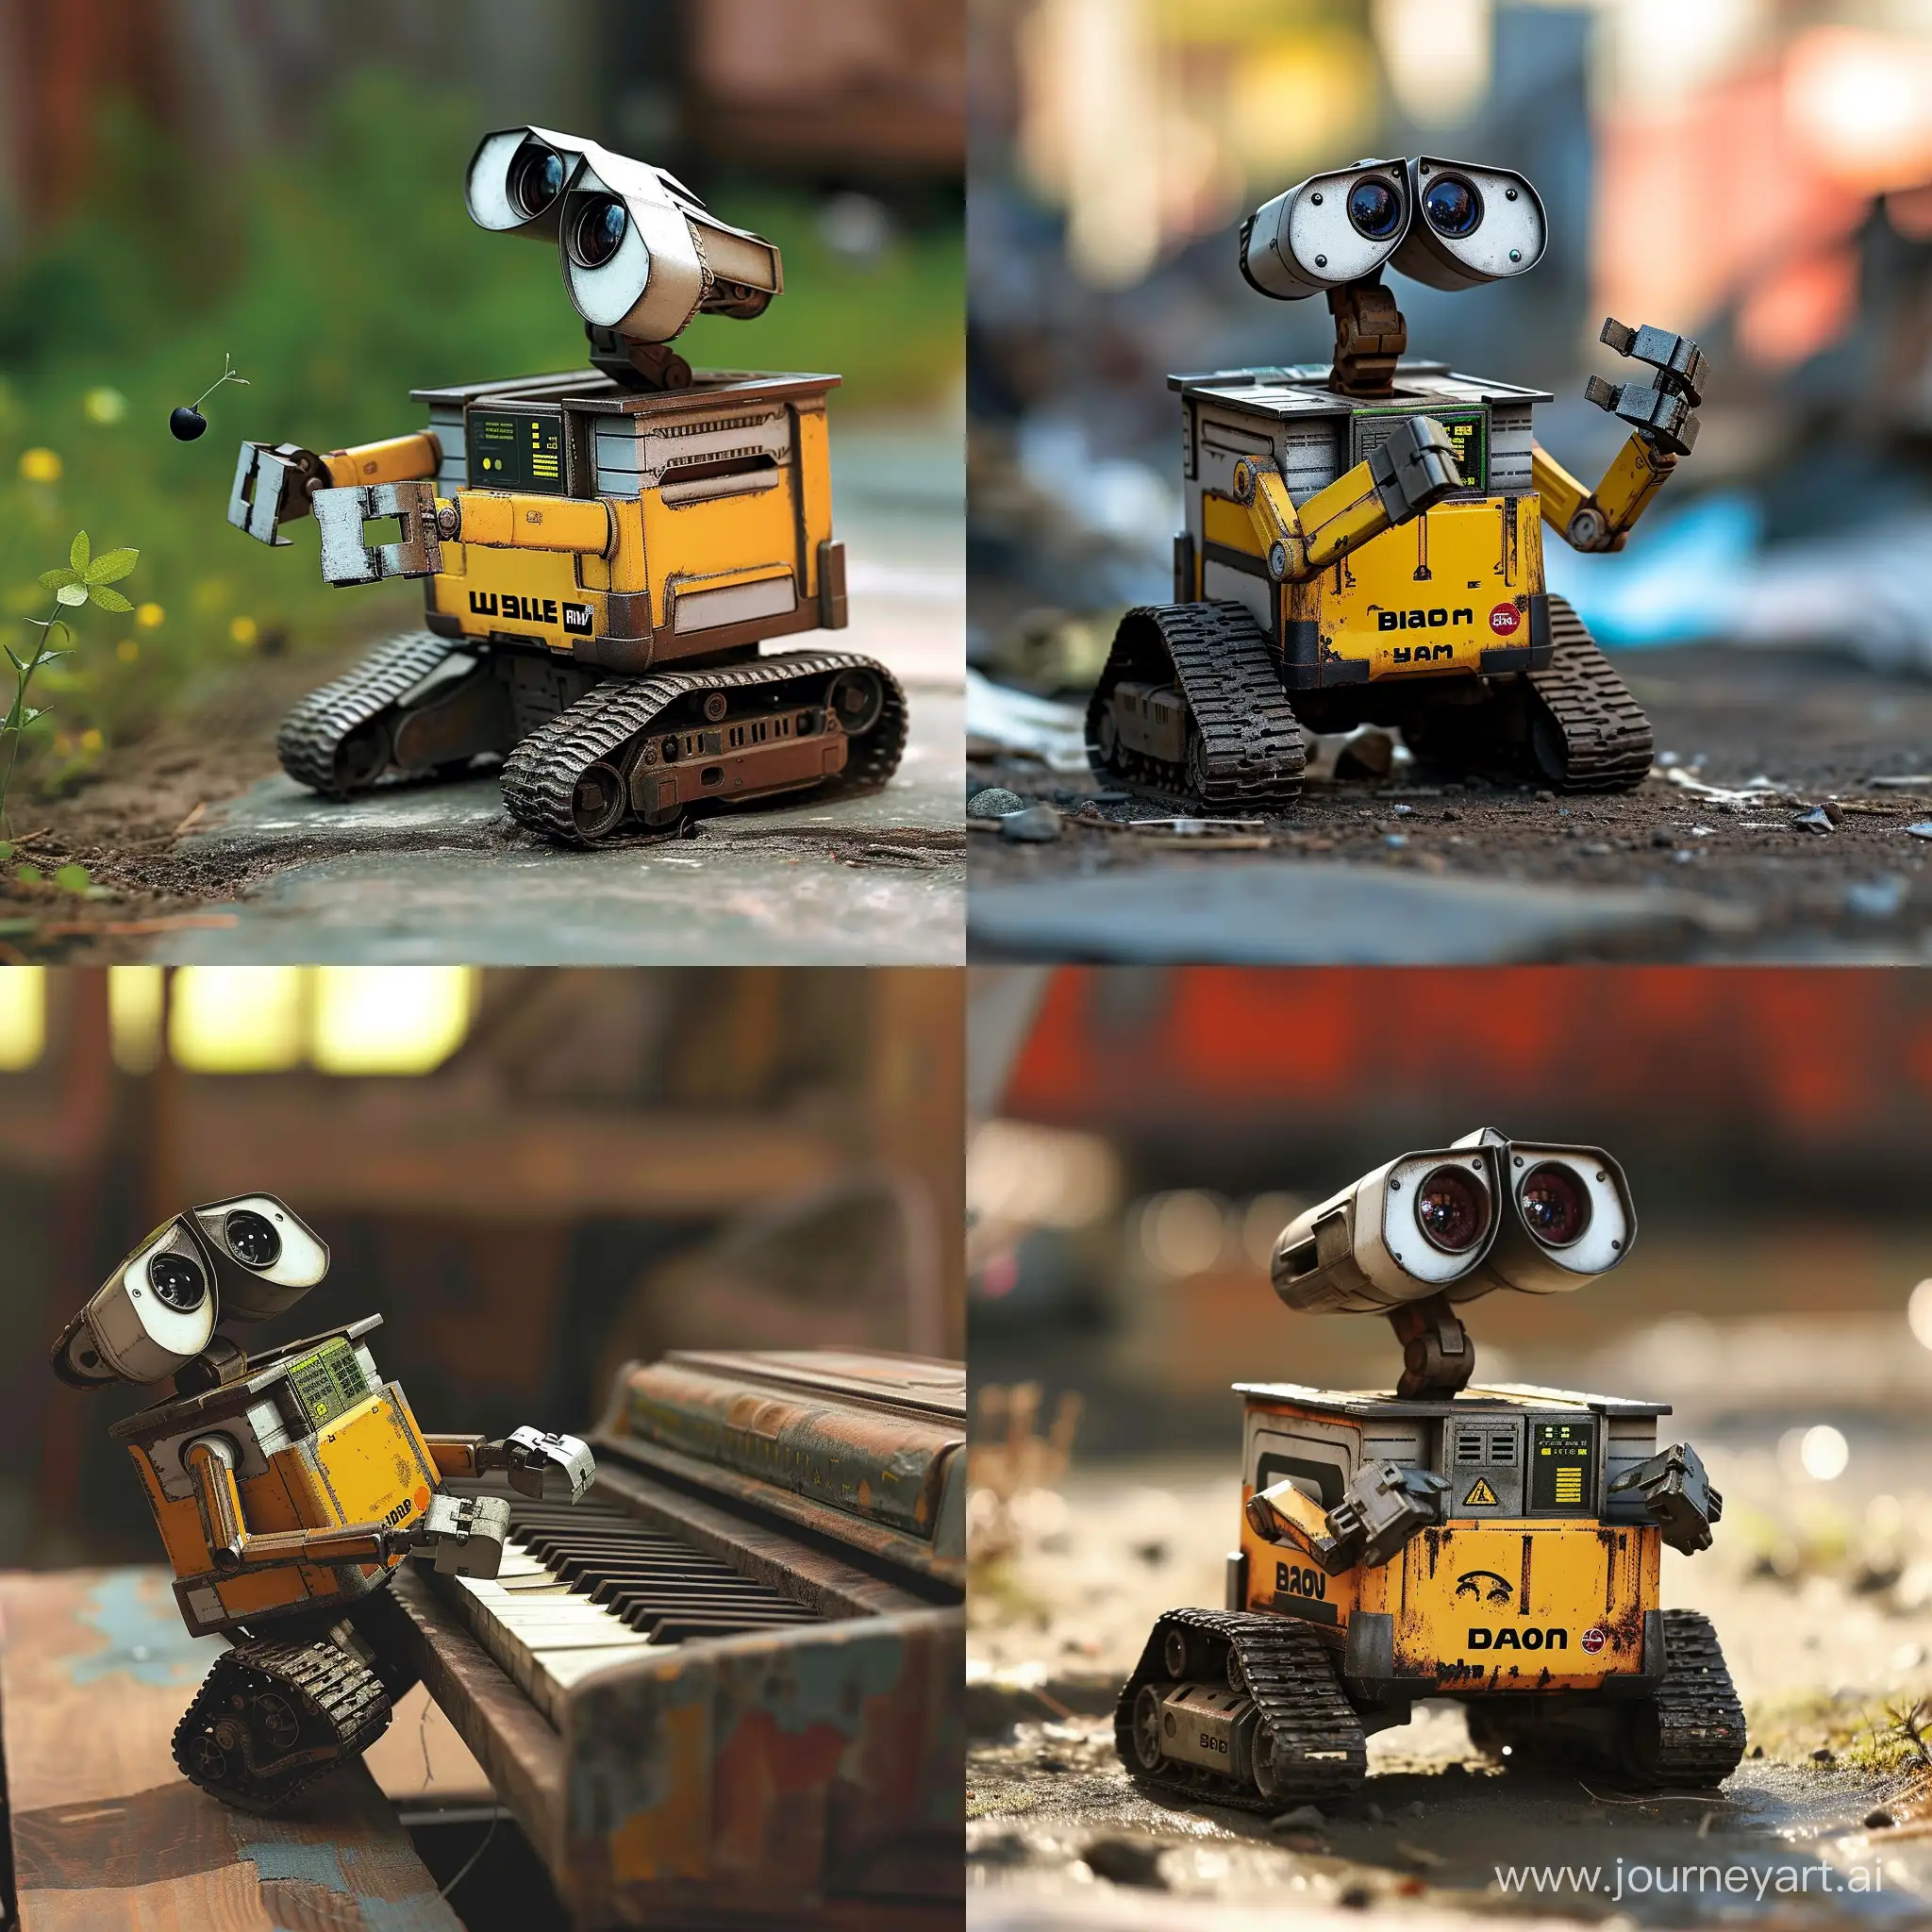 Adorable-WallE-Robot-Playing-in-a-Whimsical-Scene